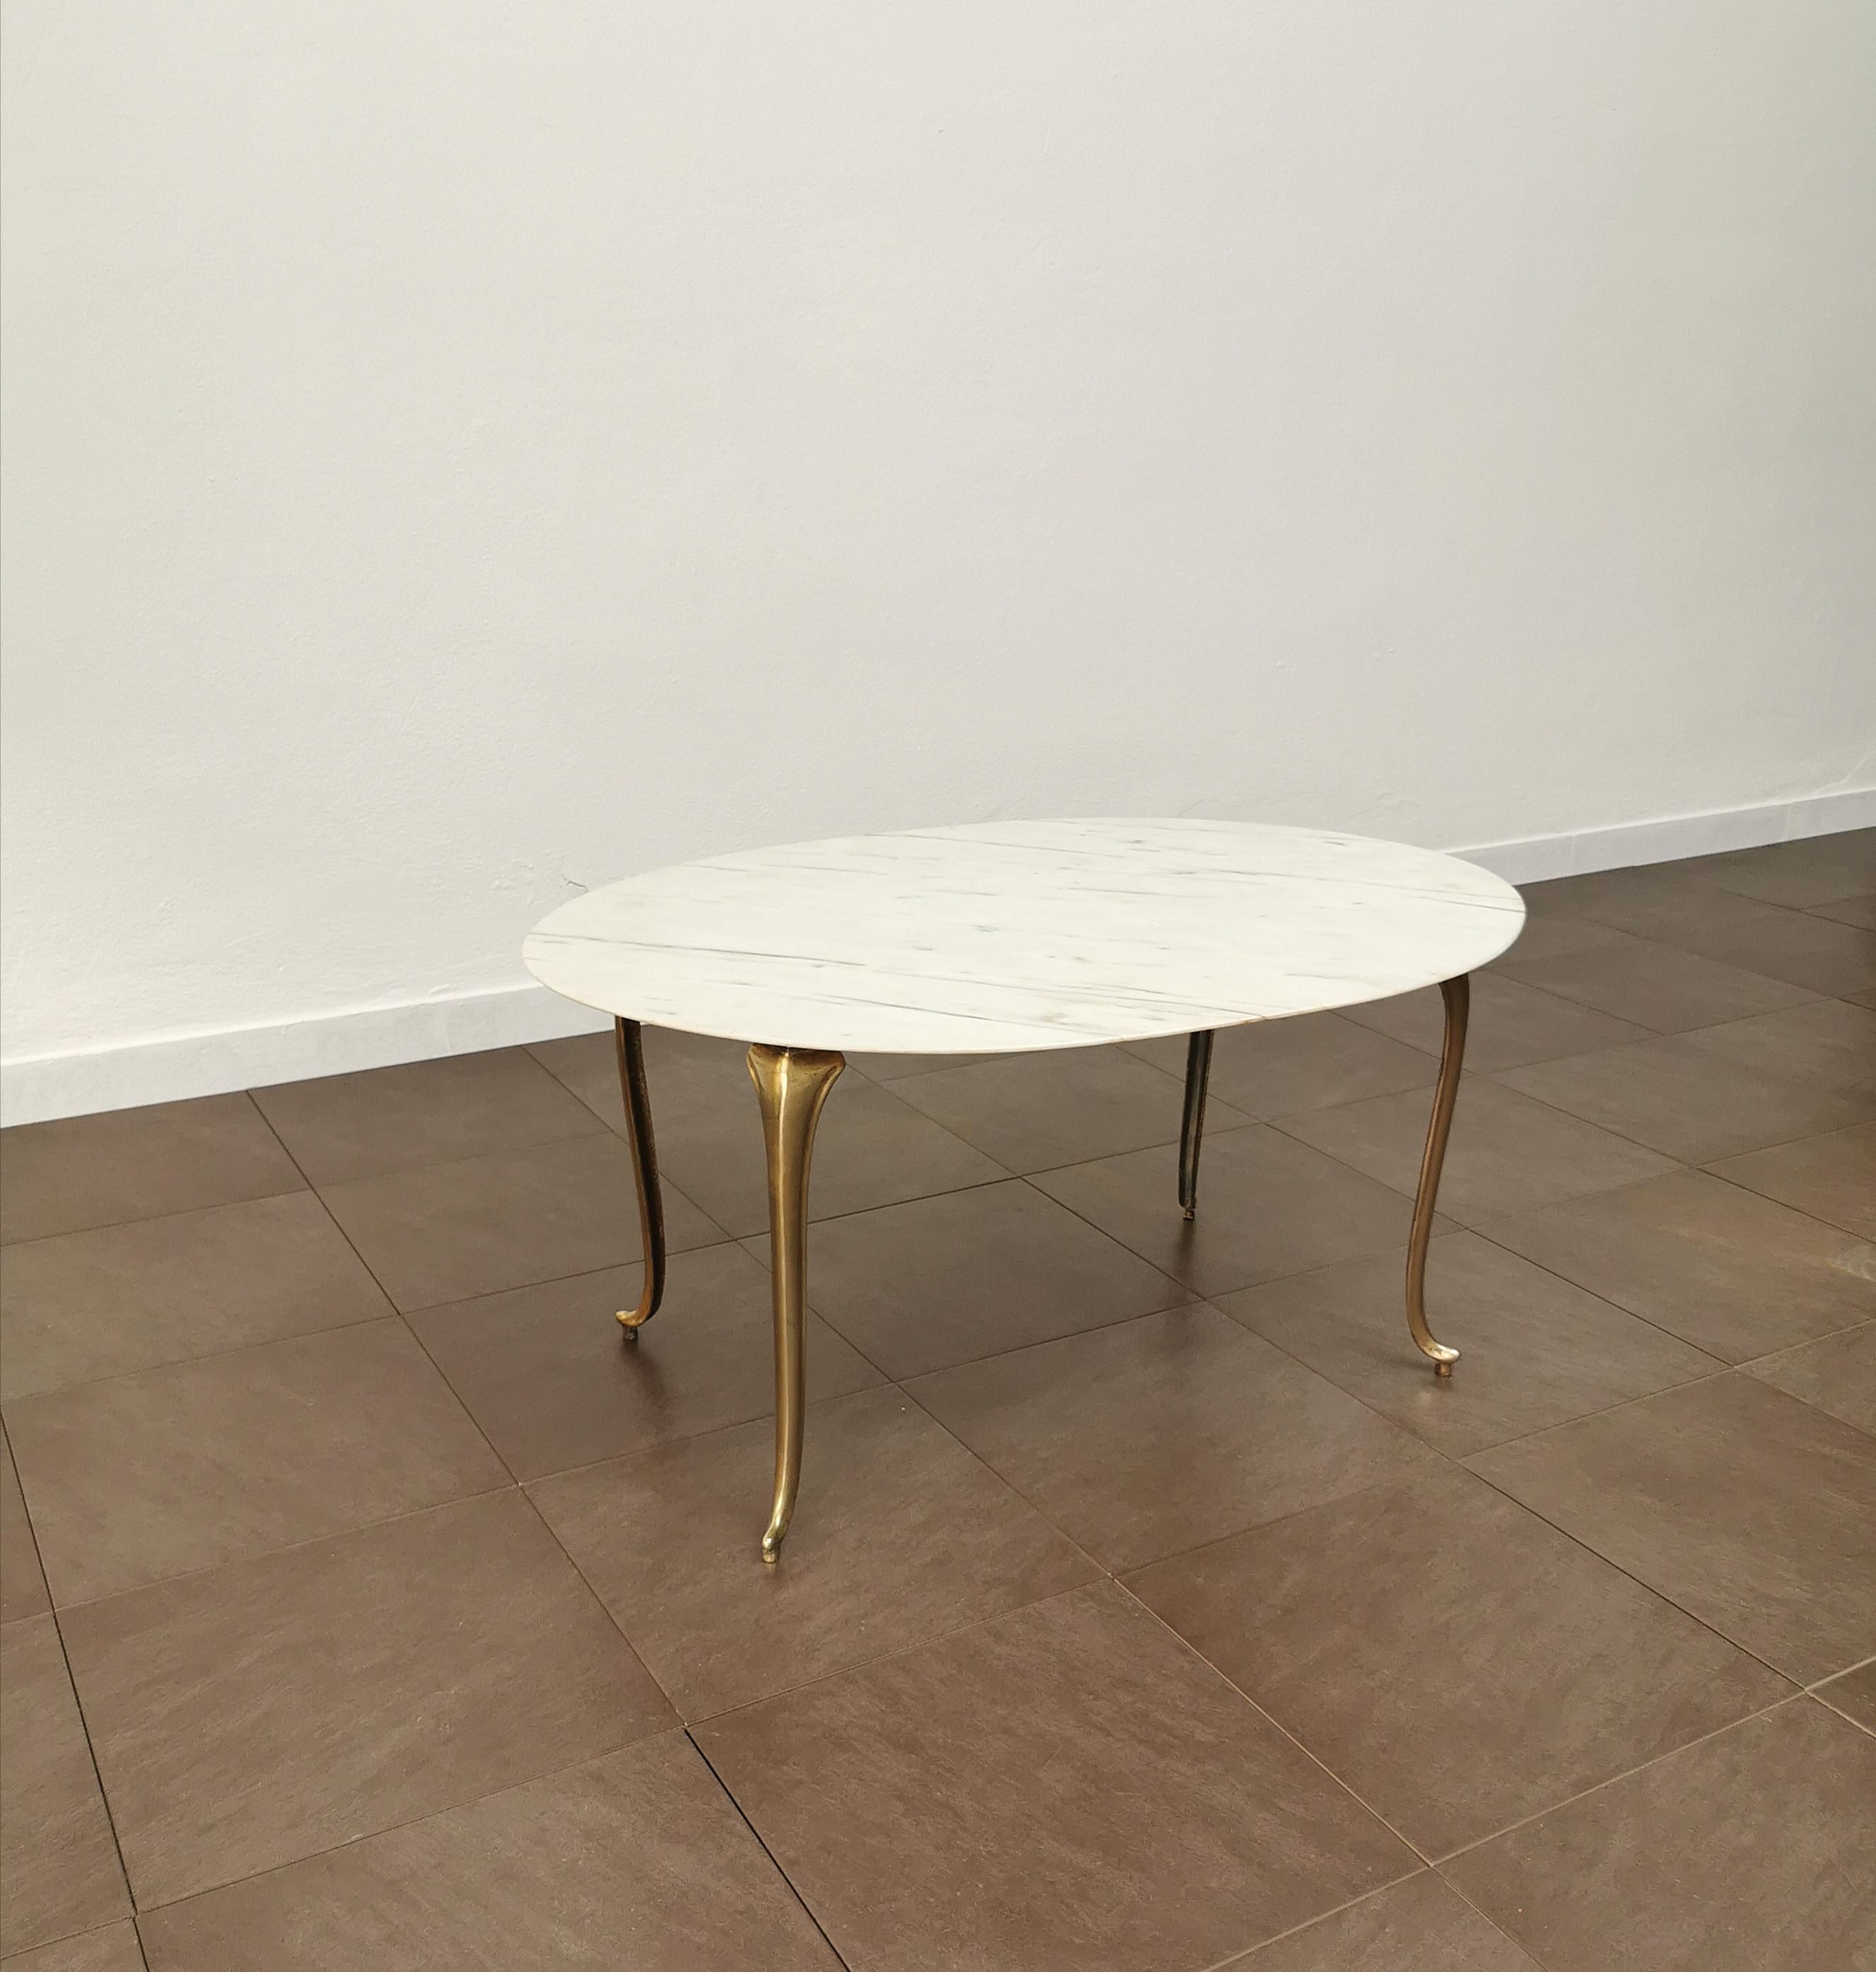 Coffee table made in Italy in the 1950s. The coffee table was made with a 4-legged brass structure with curvilinear shapes, where an oval-shaped top in white marble rests on top.